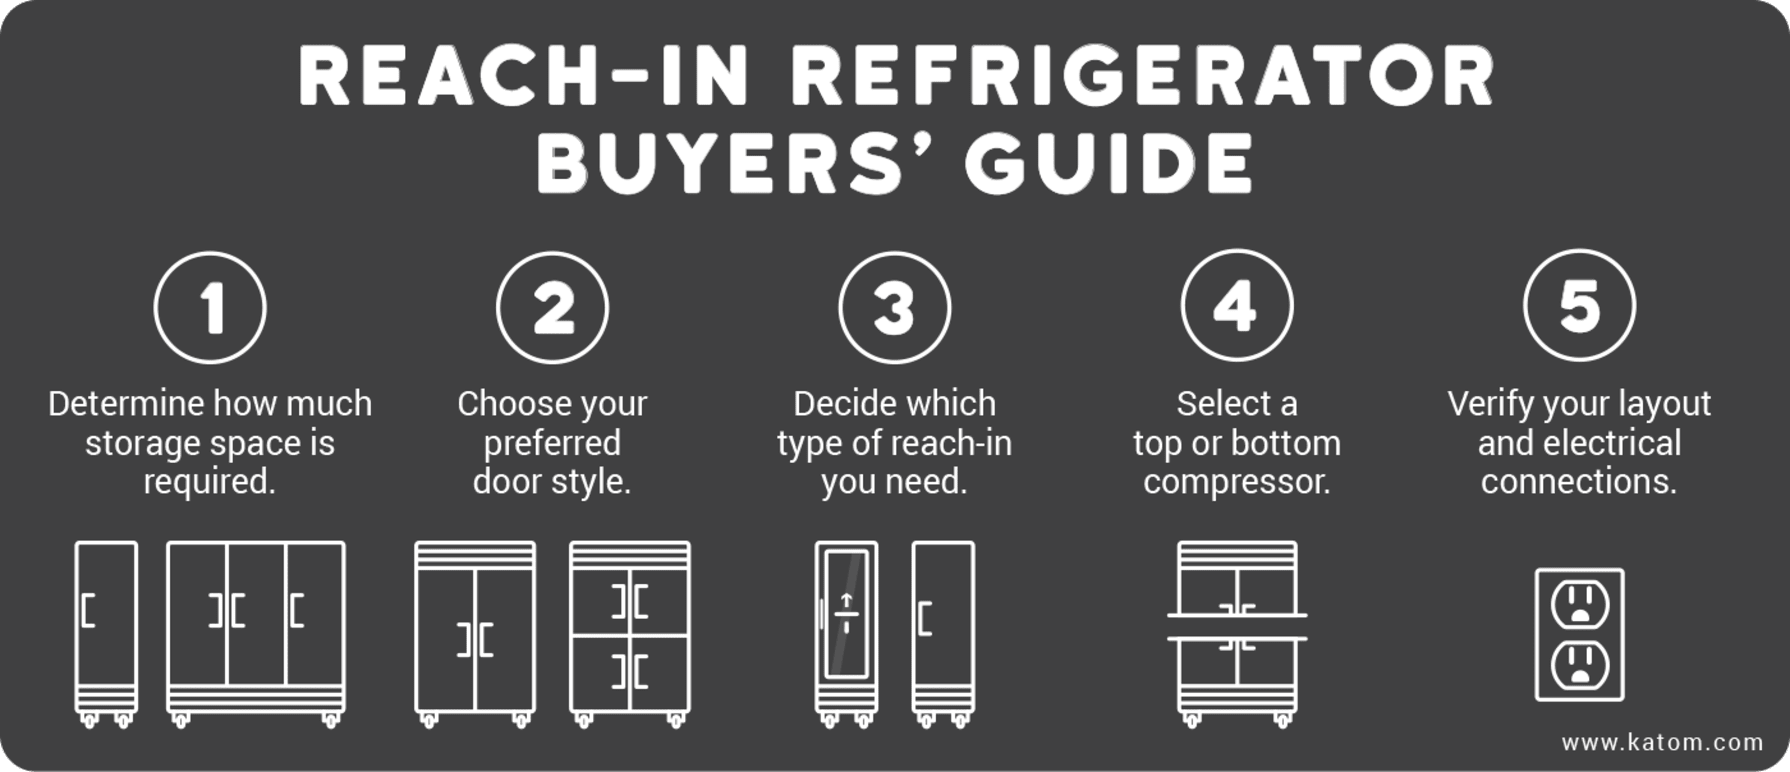 Choosing the Right Refrigerator - Buying Guides ArchiExpo